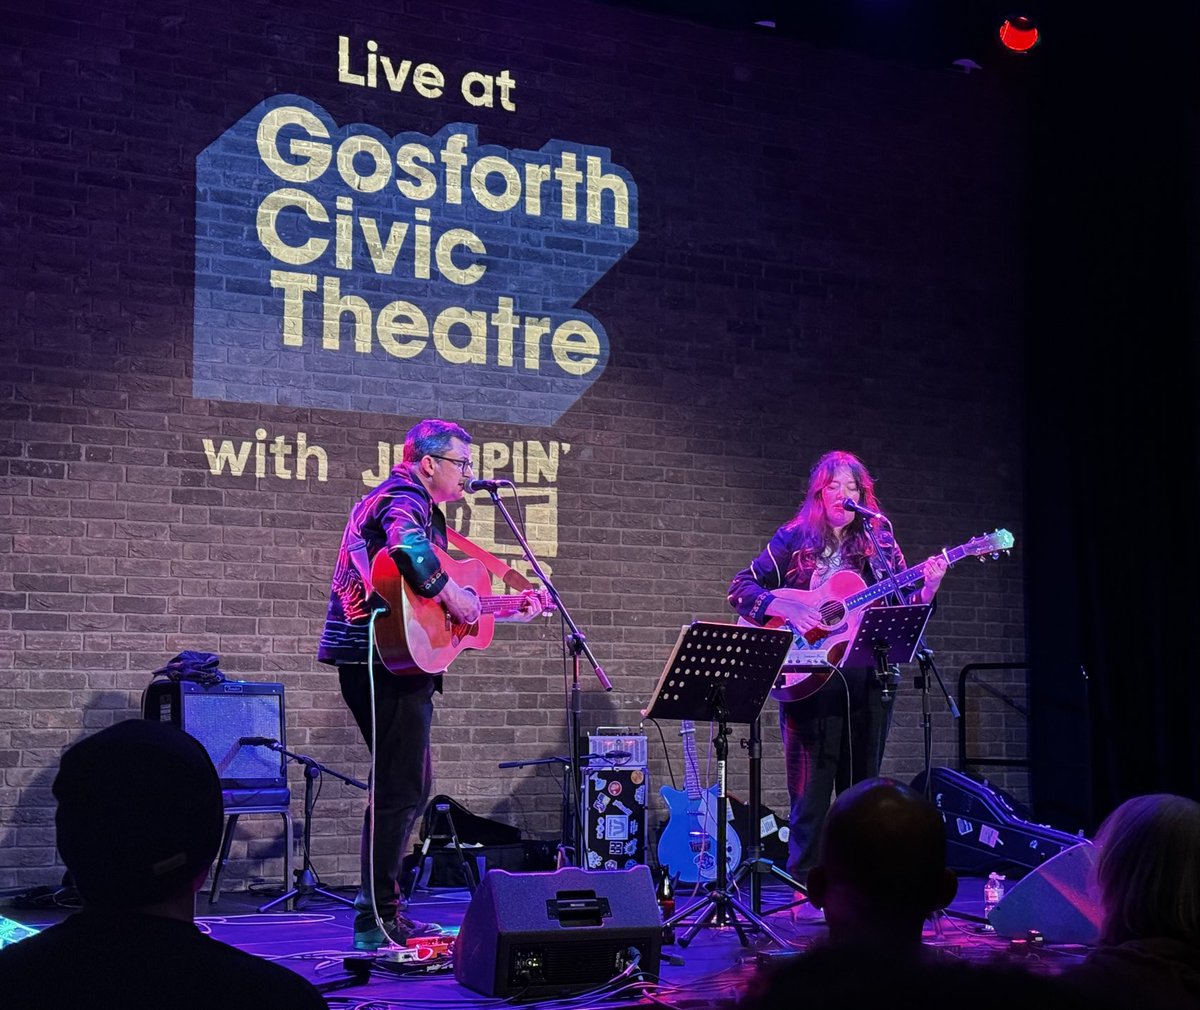 Such a beautiful gig ⁦@kathwilliamsuk⁩ & ⁦@witheredhand⁩ at ⁦@GoCivTheatre⁩ last night. They’ve made a great album together and are on tour. Catch ‘em if you can! kathrynwilliams.co.uk/live